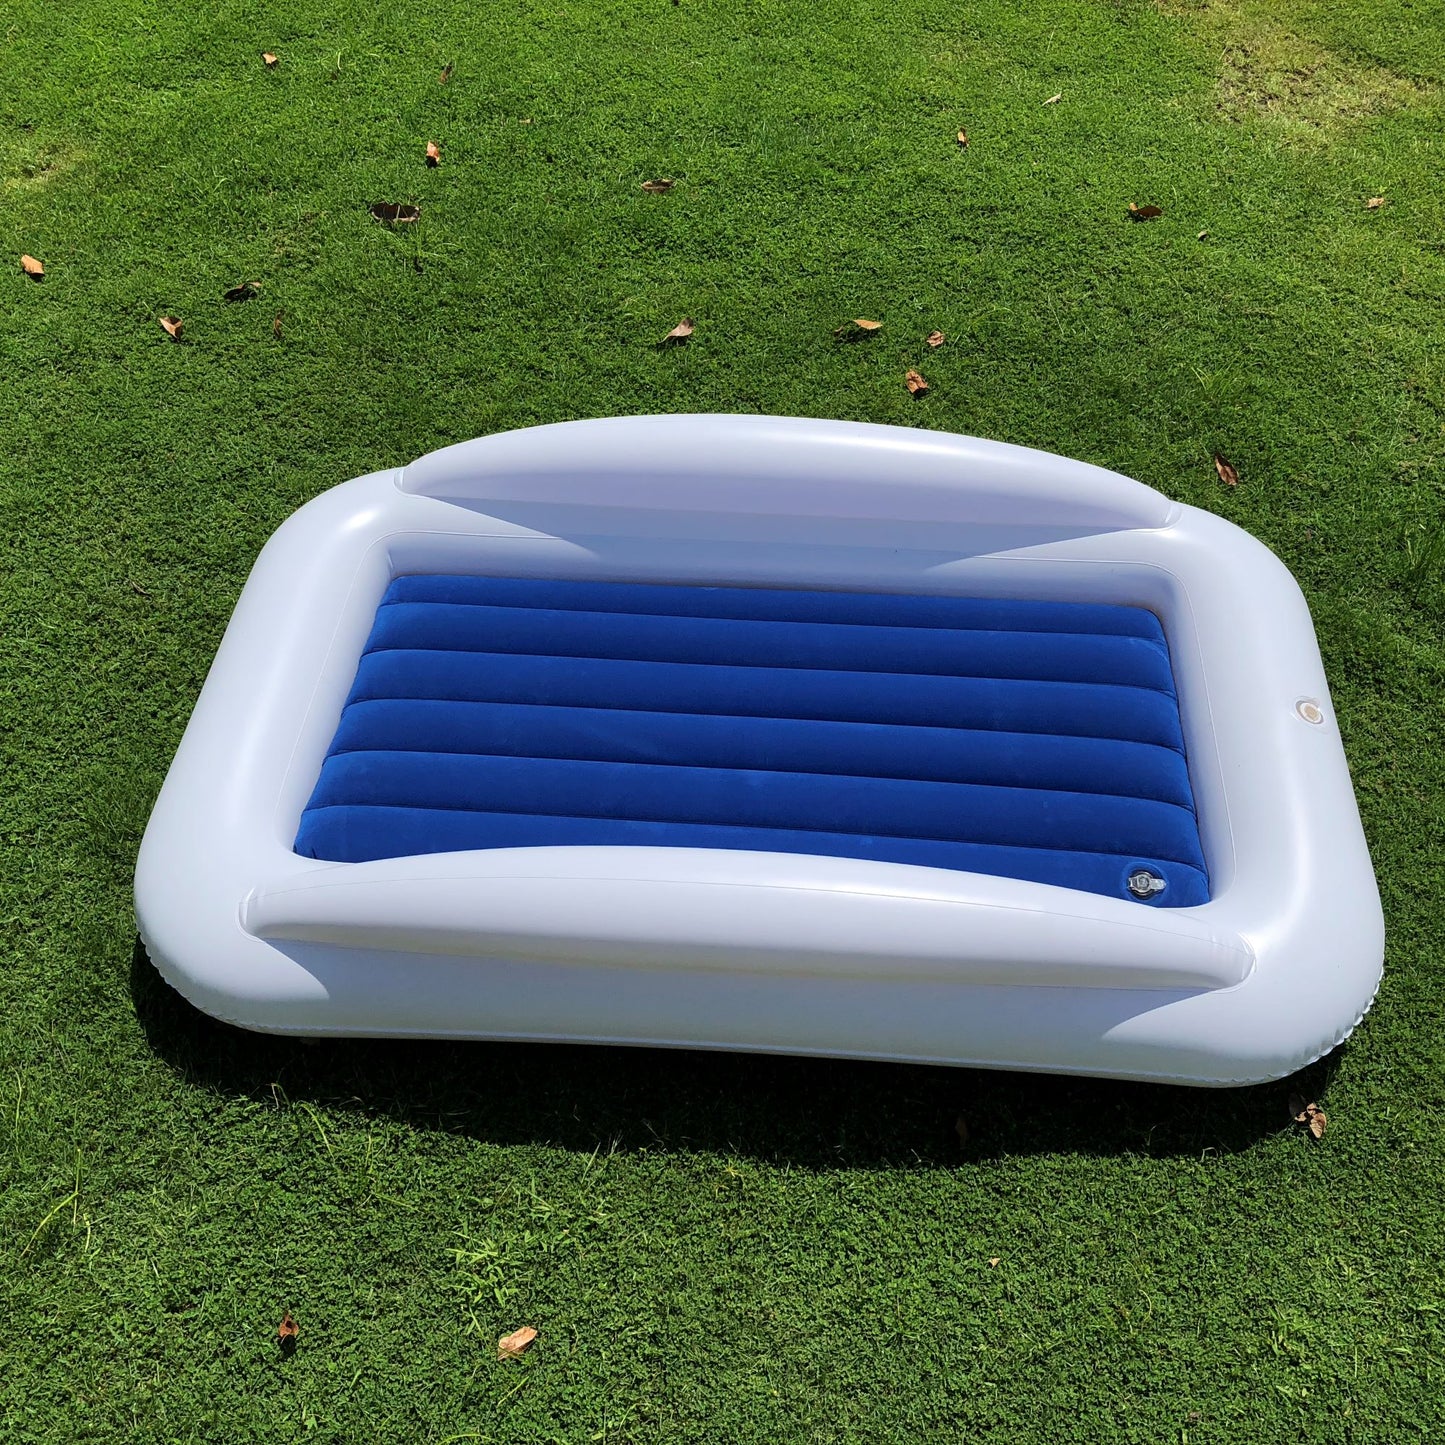 The Mum Shop AU Inflatable Toddler Travel Bed with Safety Bumpers -BEST SELLER